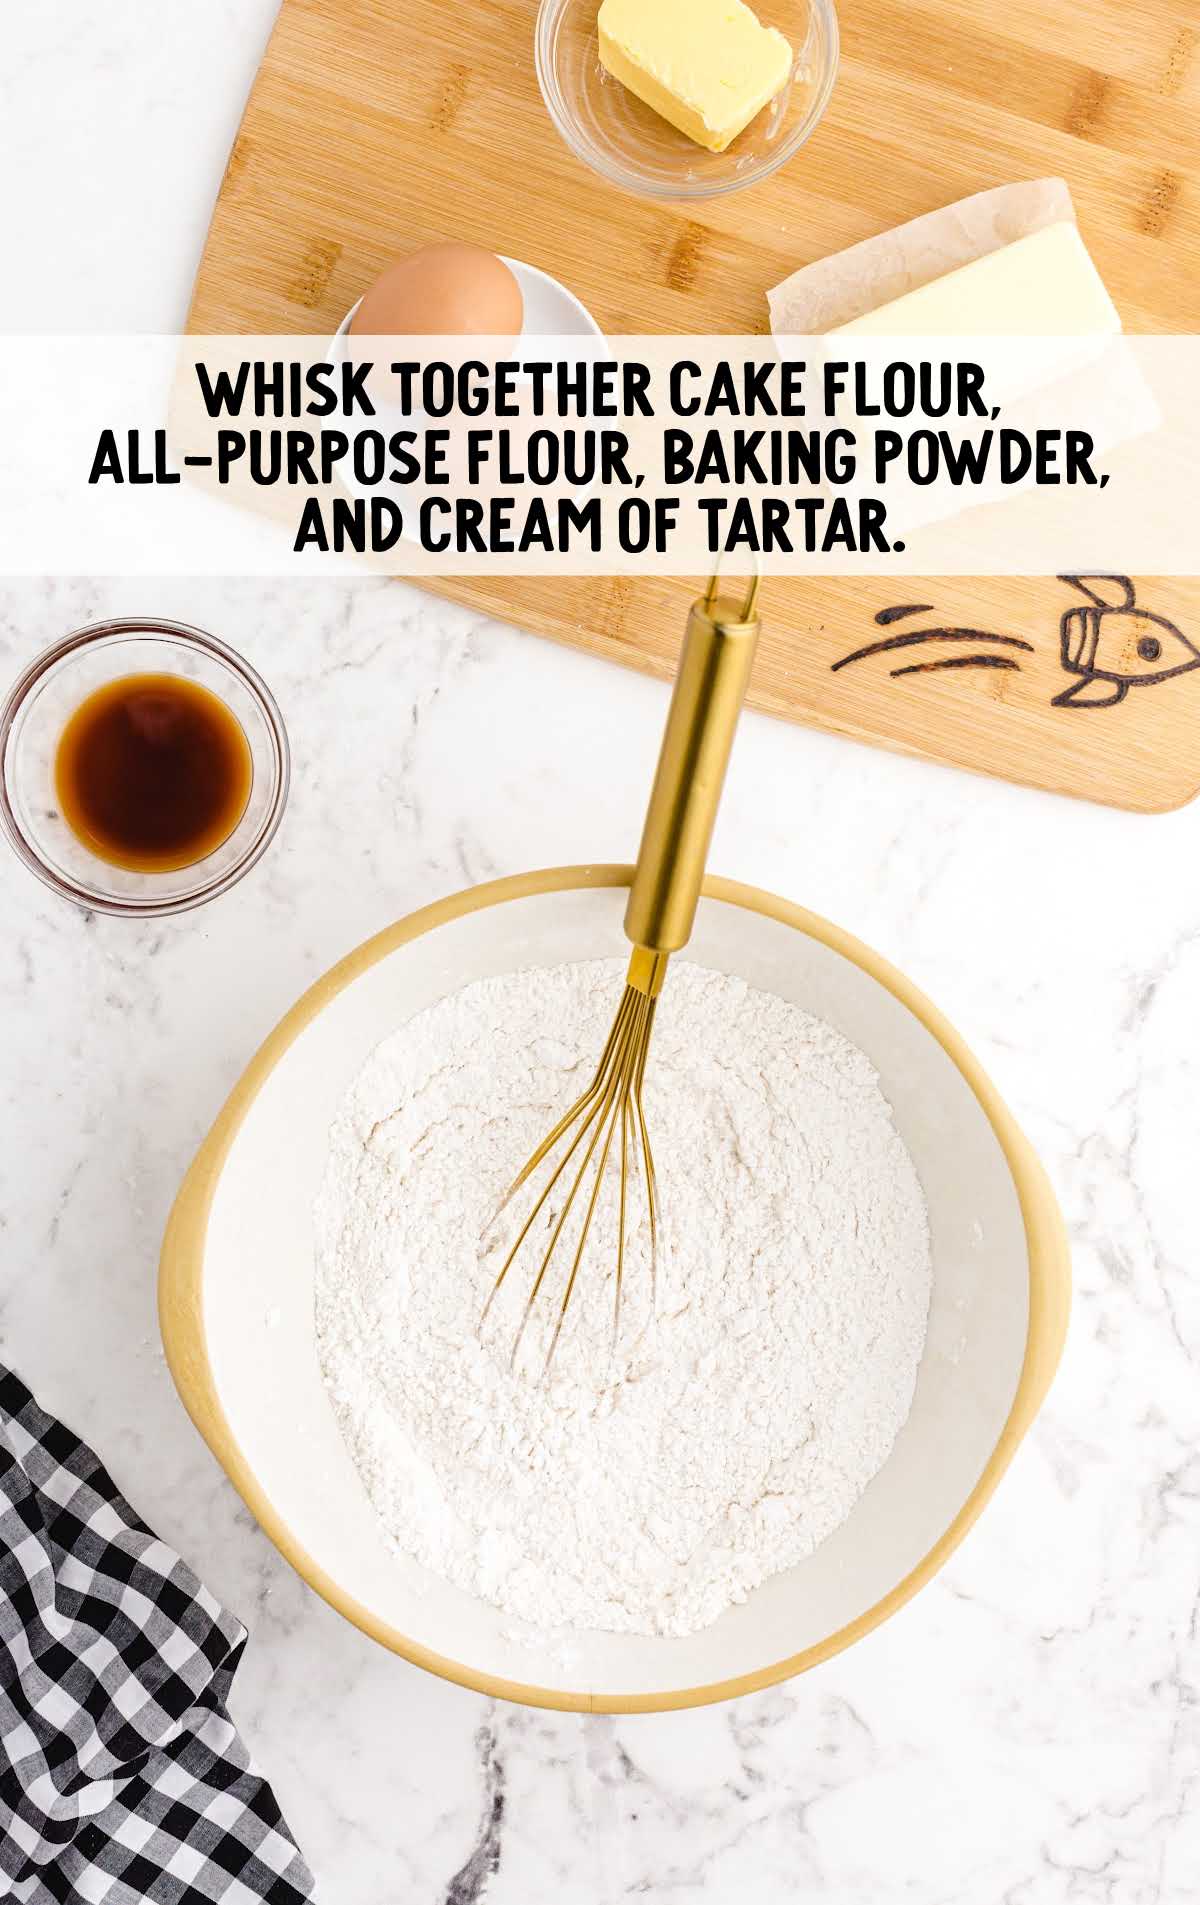 flour, baking powder, and cream of tartar whisked together in a bowl